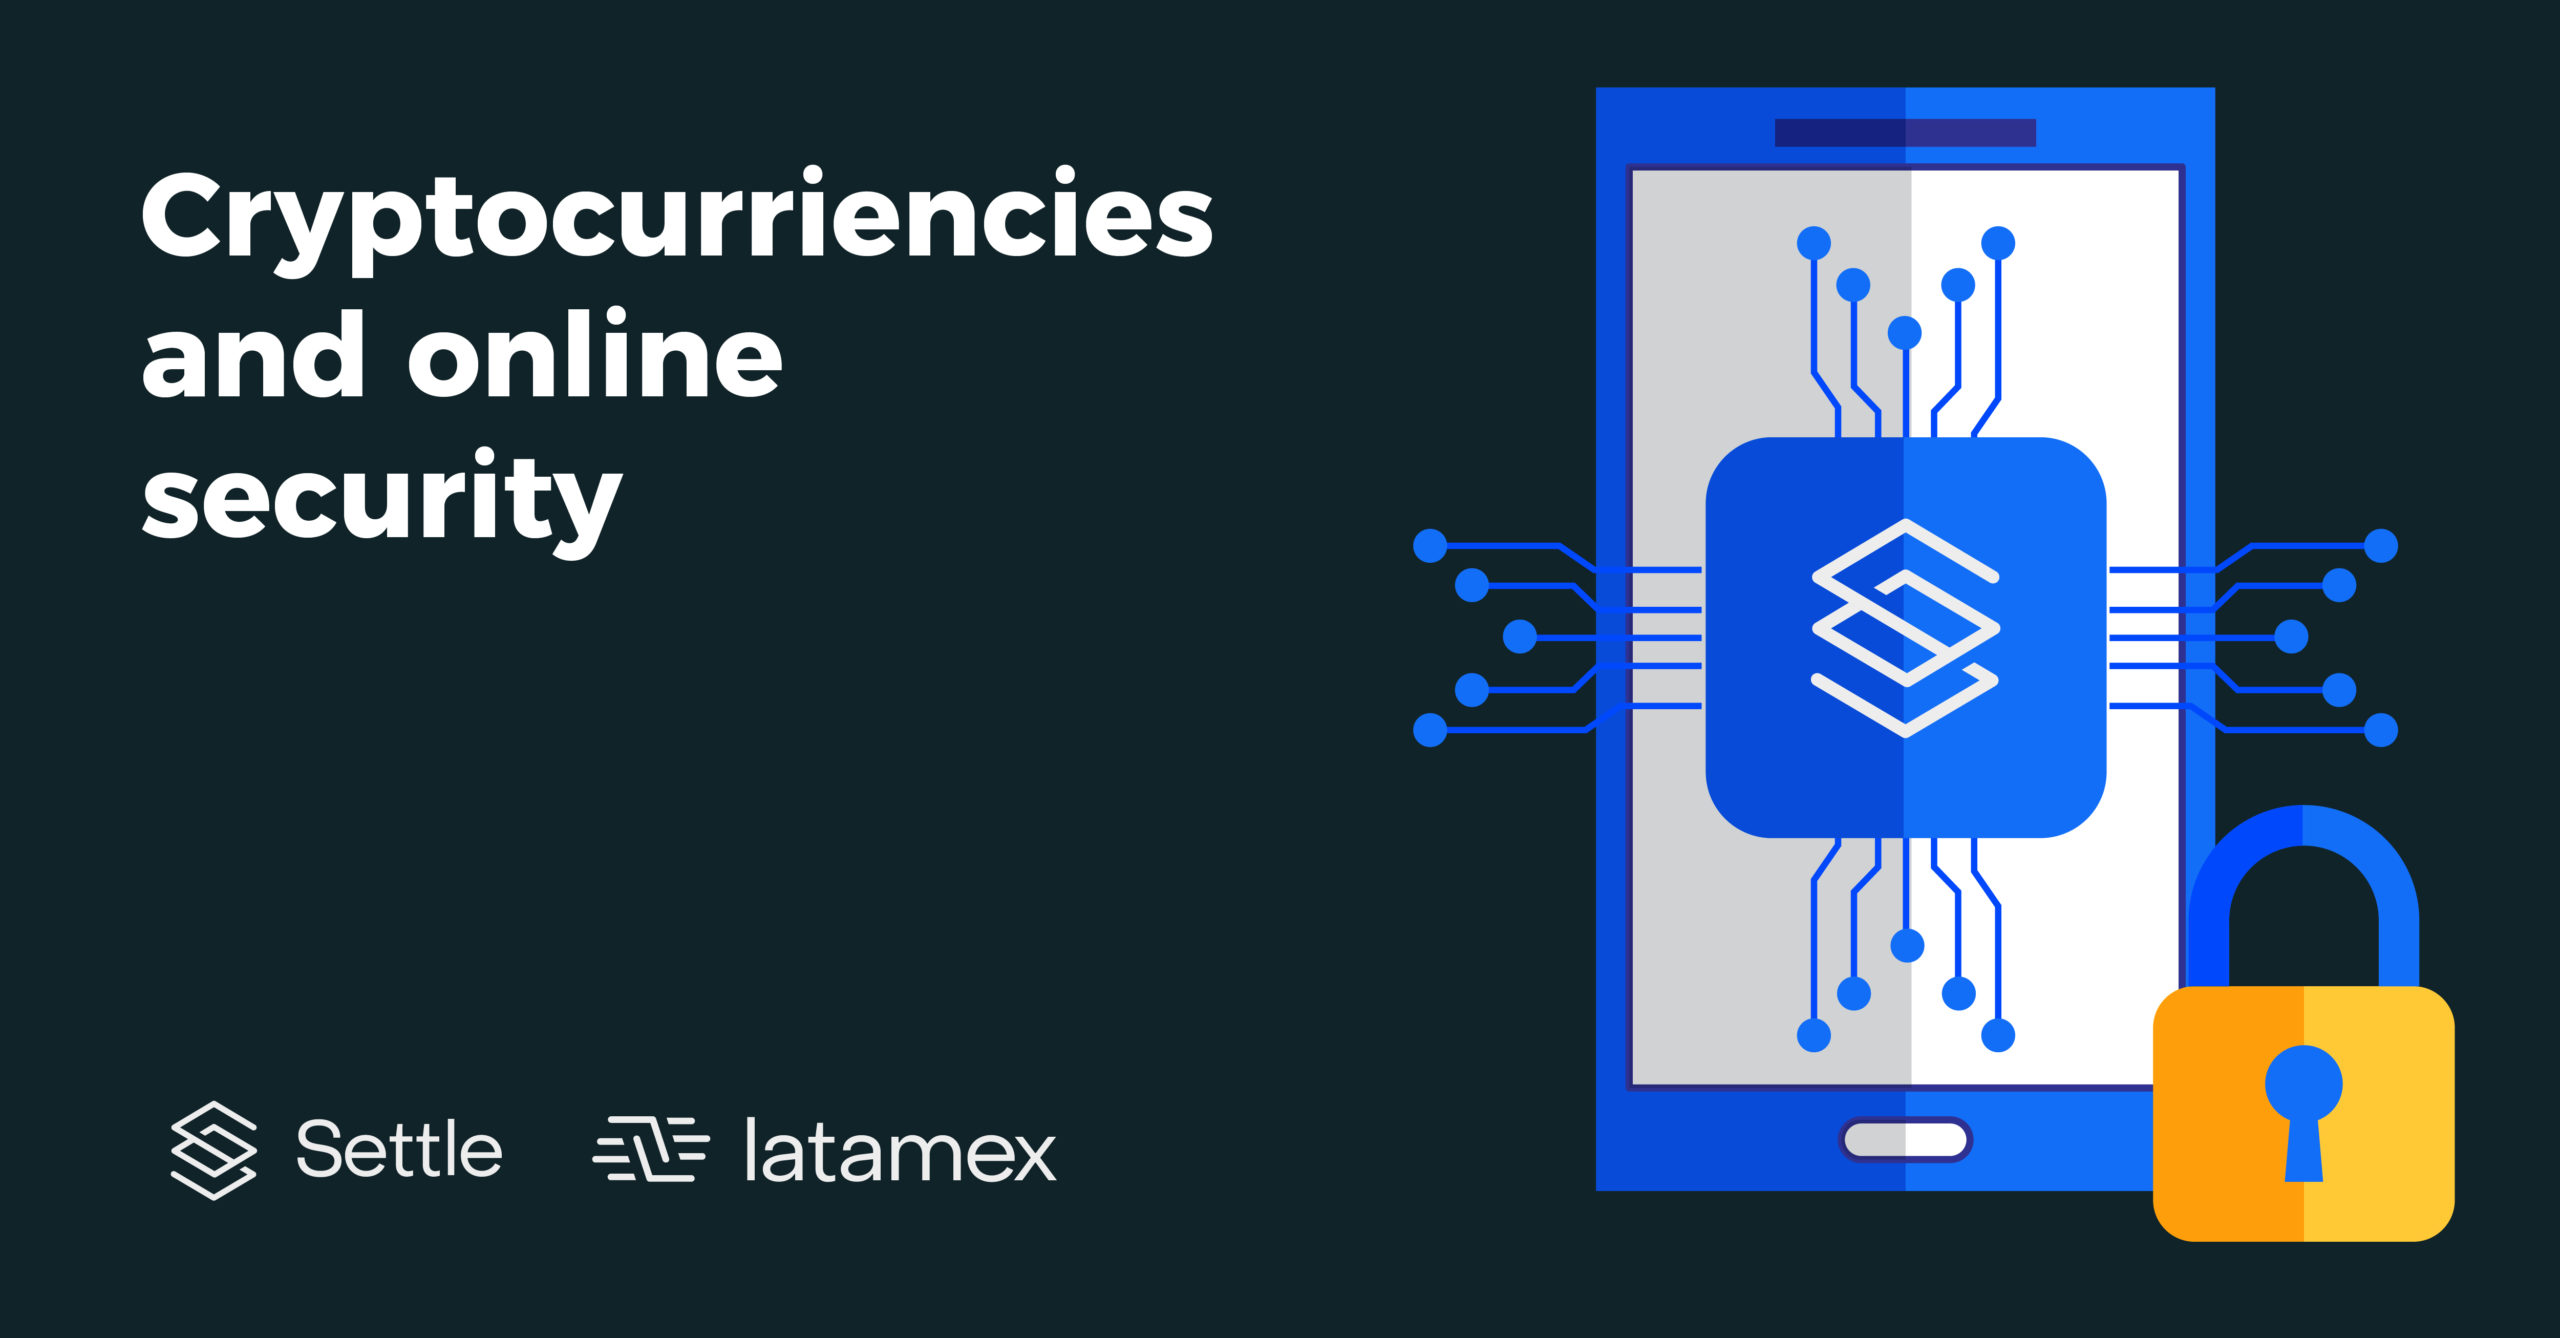 Cryptocurrencies, online security, Settle Network, Latamex